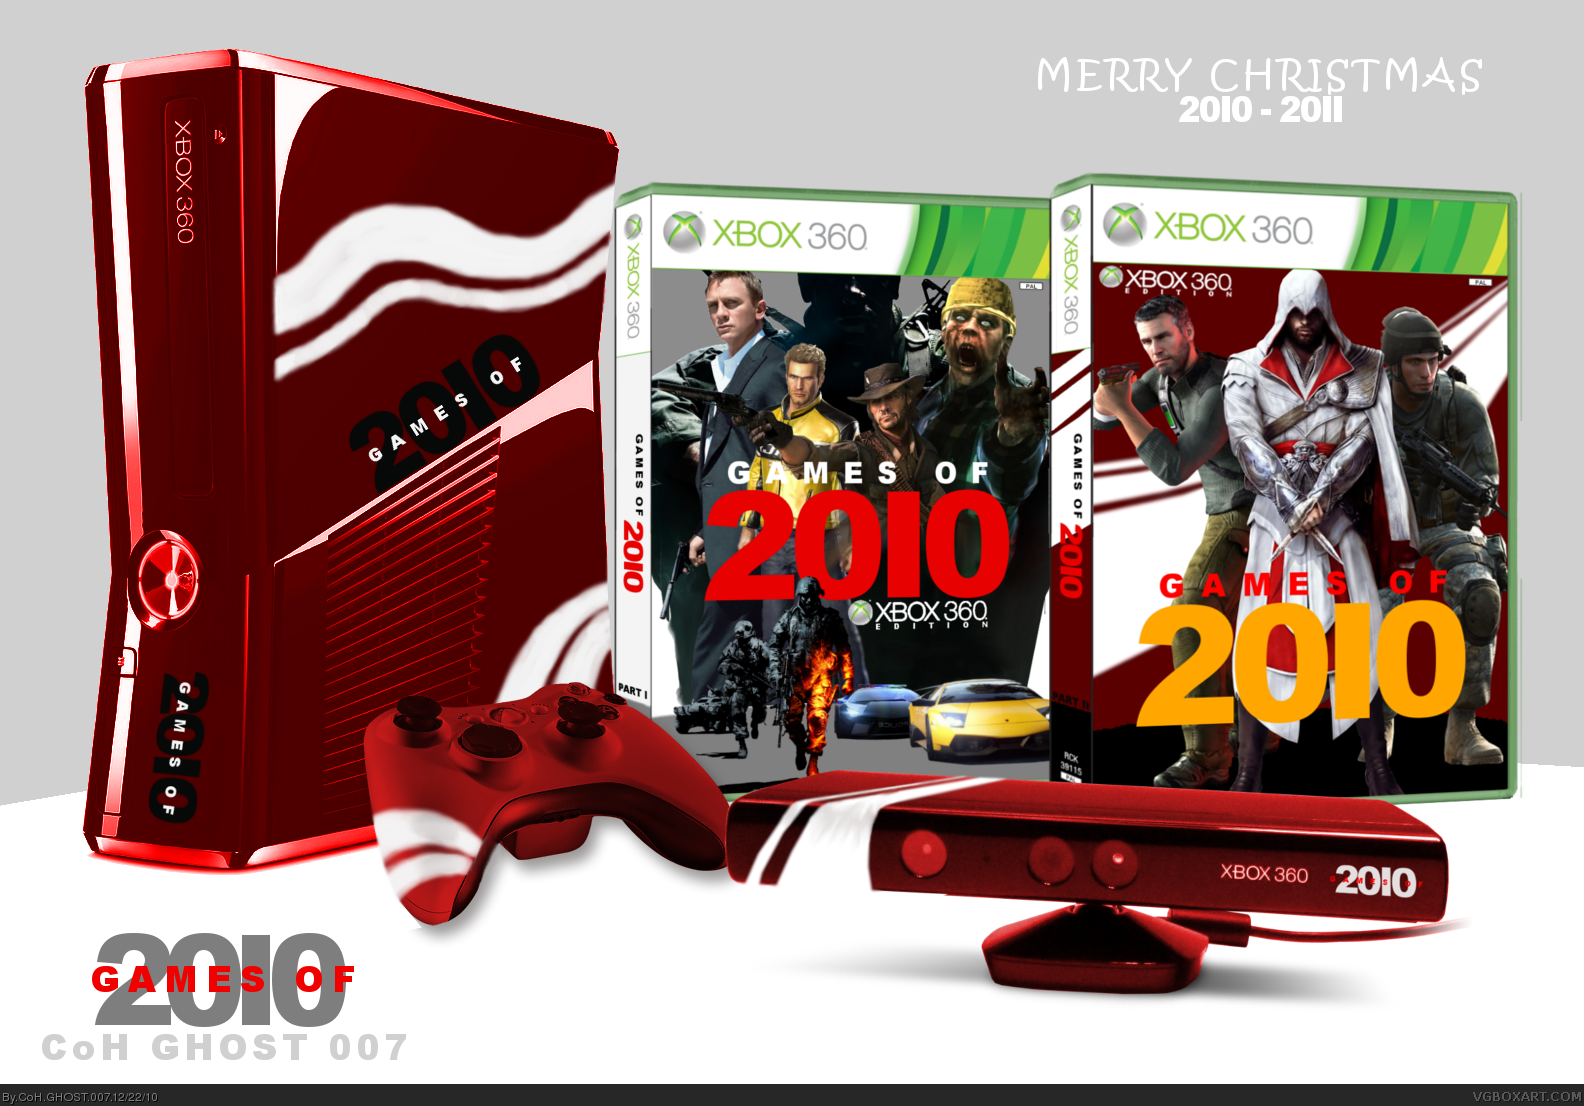 Games of: 2010 box cover